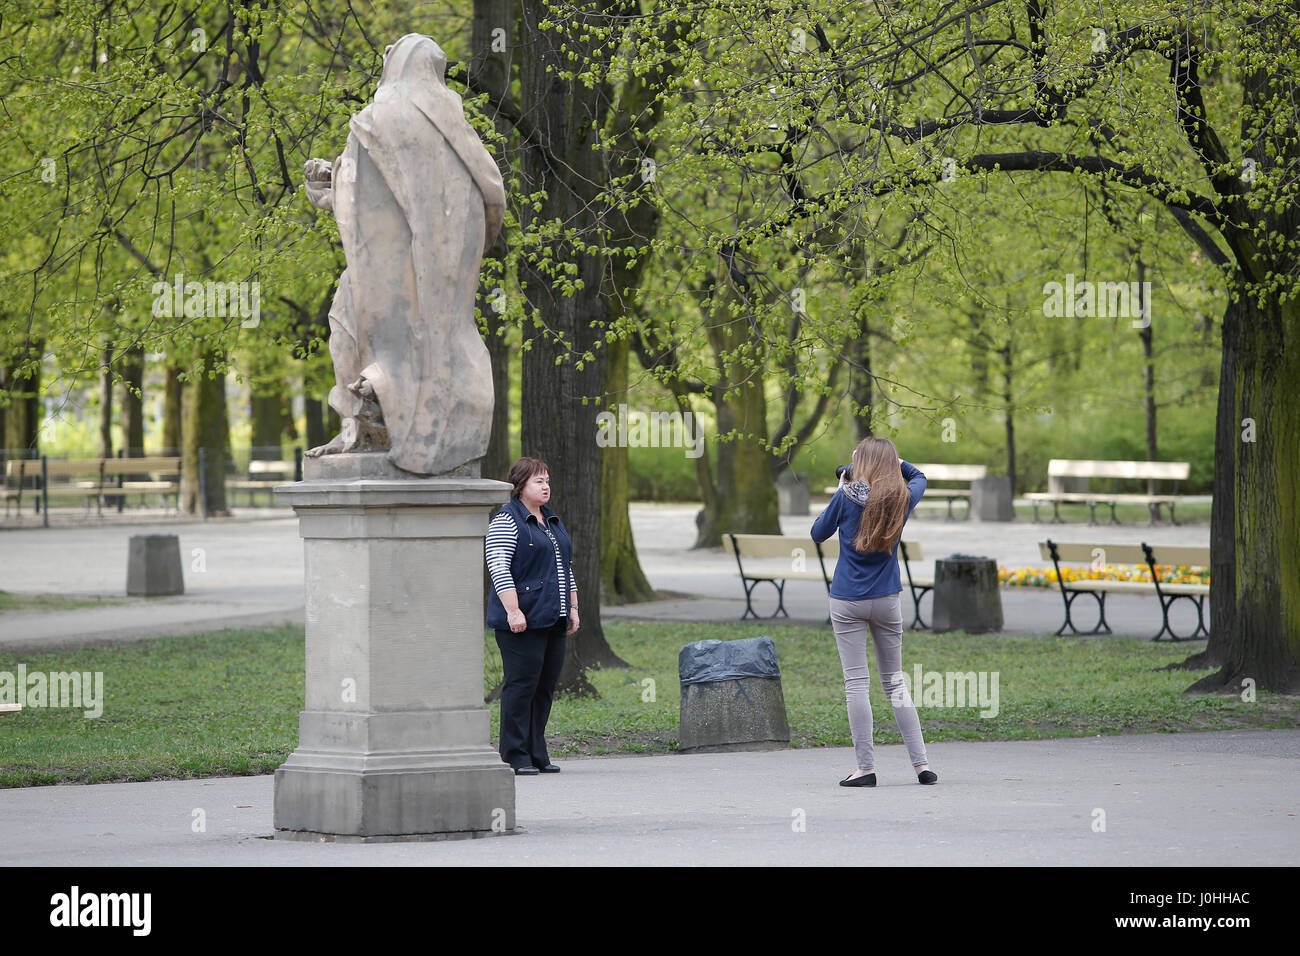 A young woman is seen taking a portrait in the Ogrod Saski park in Warsaw on 11 April, 2017. Stock Photo